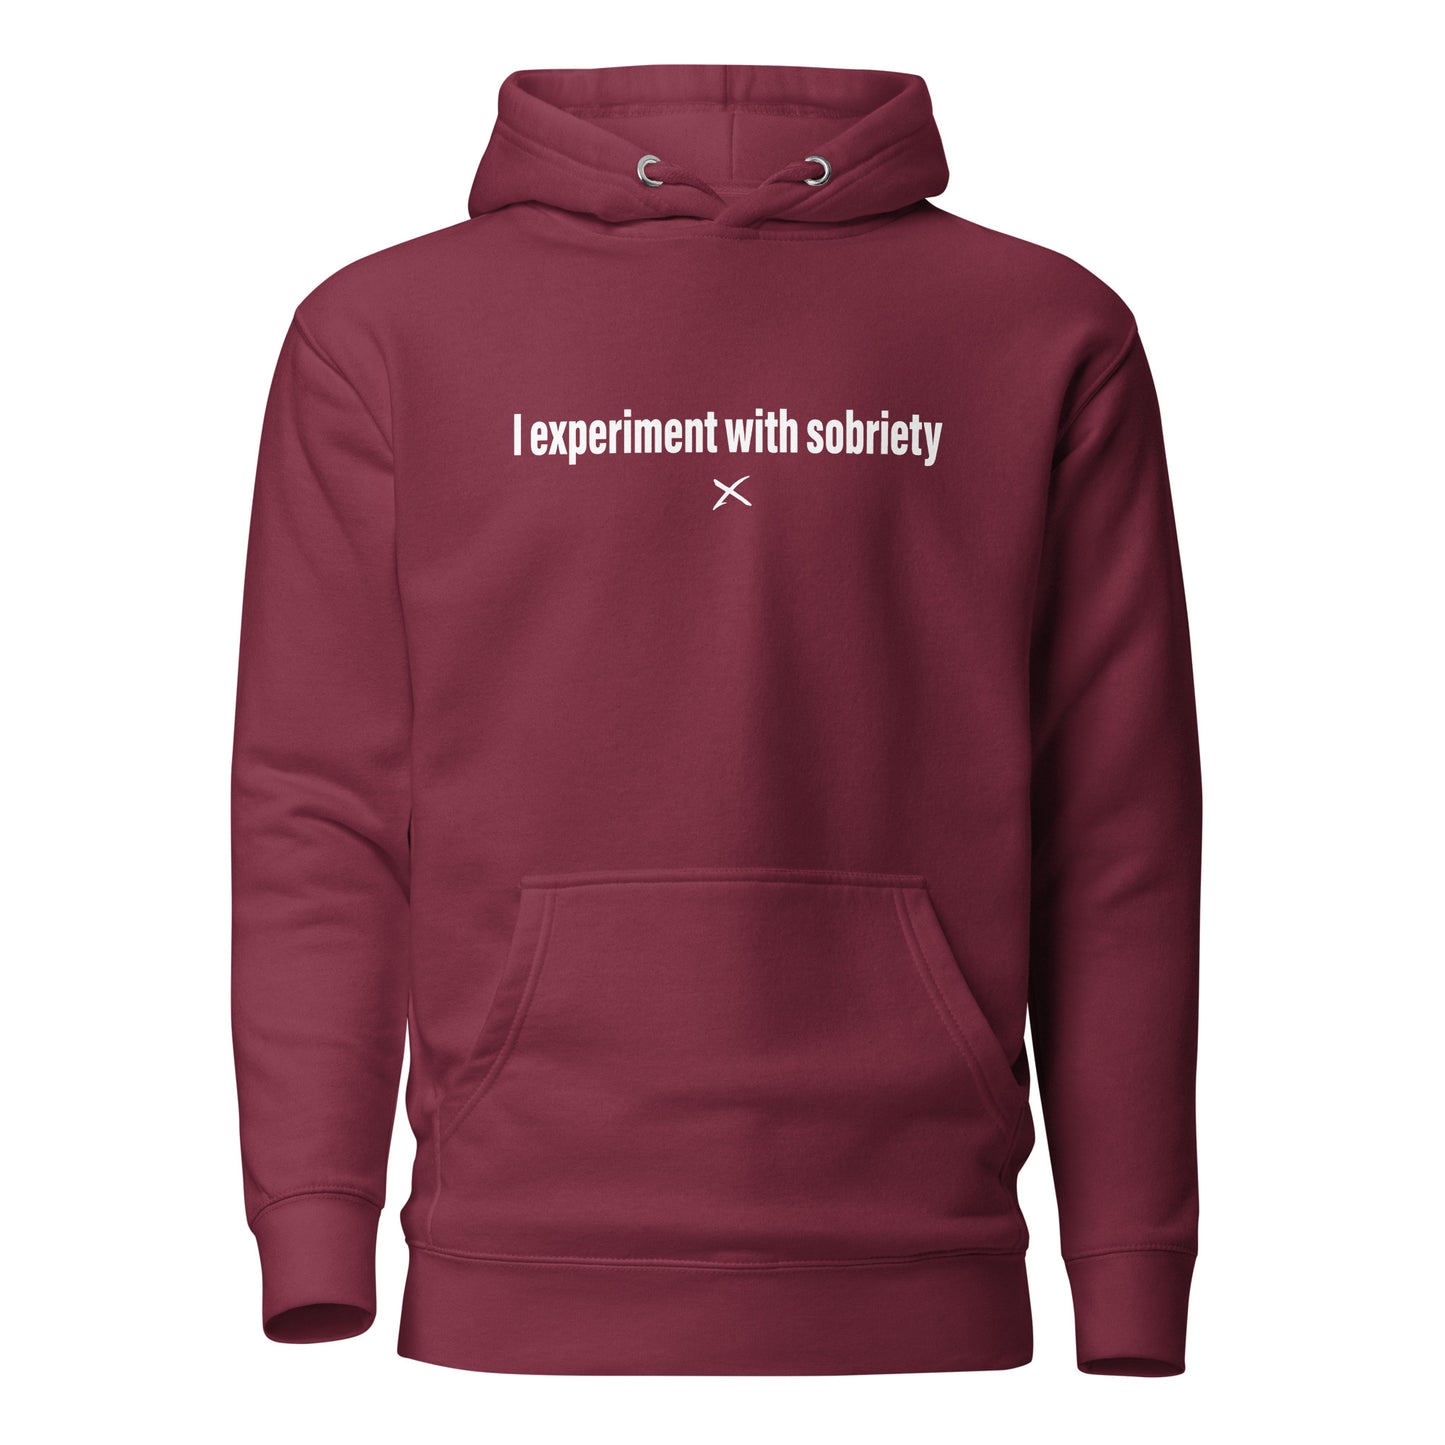 I experiment with sobriety - Hoodie